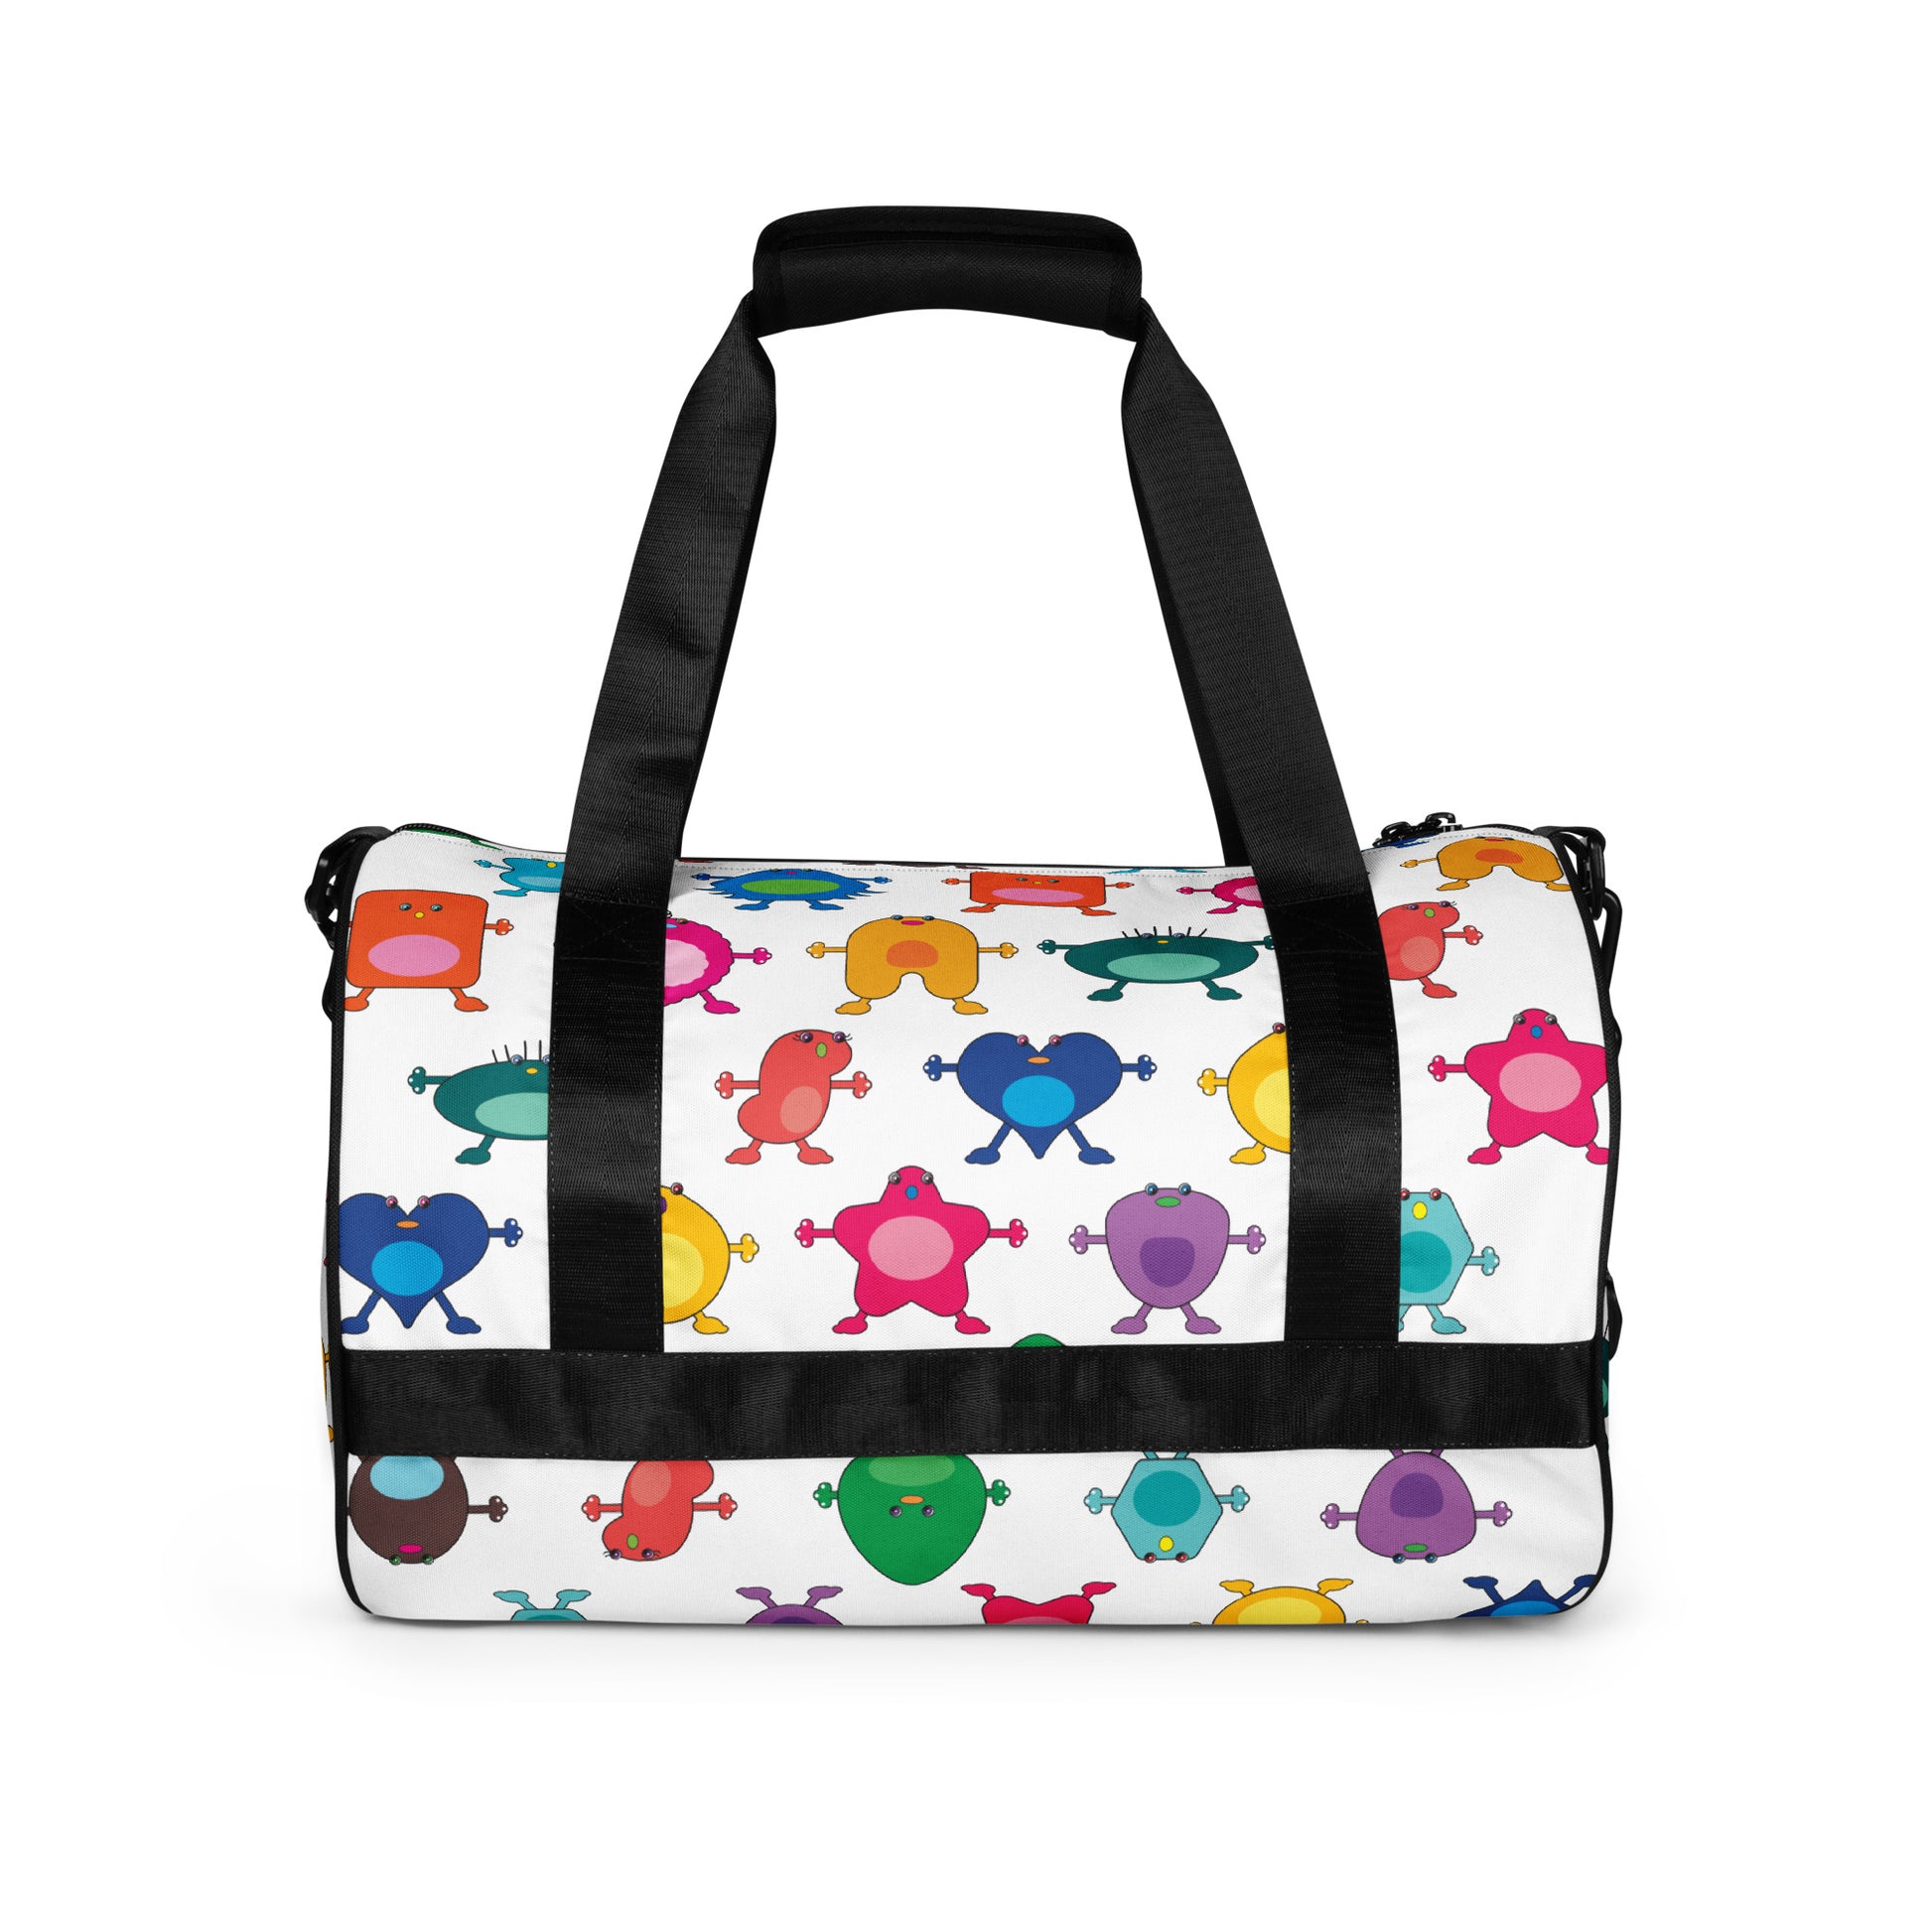 Kids cute colourful monster graphic print on white gym bag black handles side view